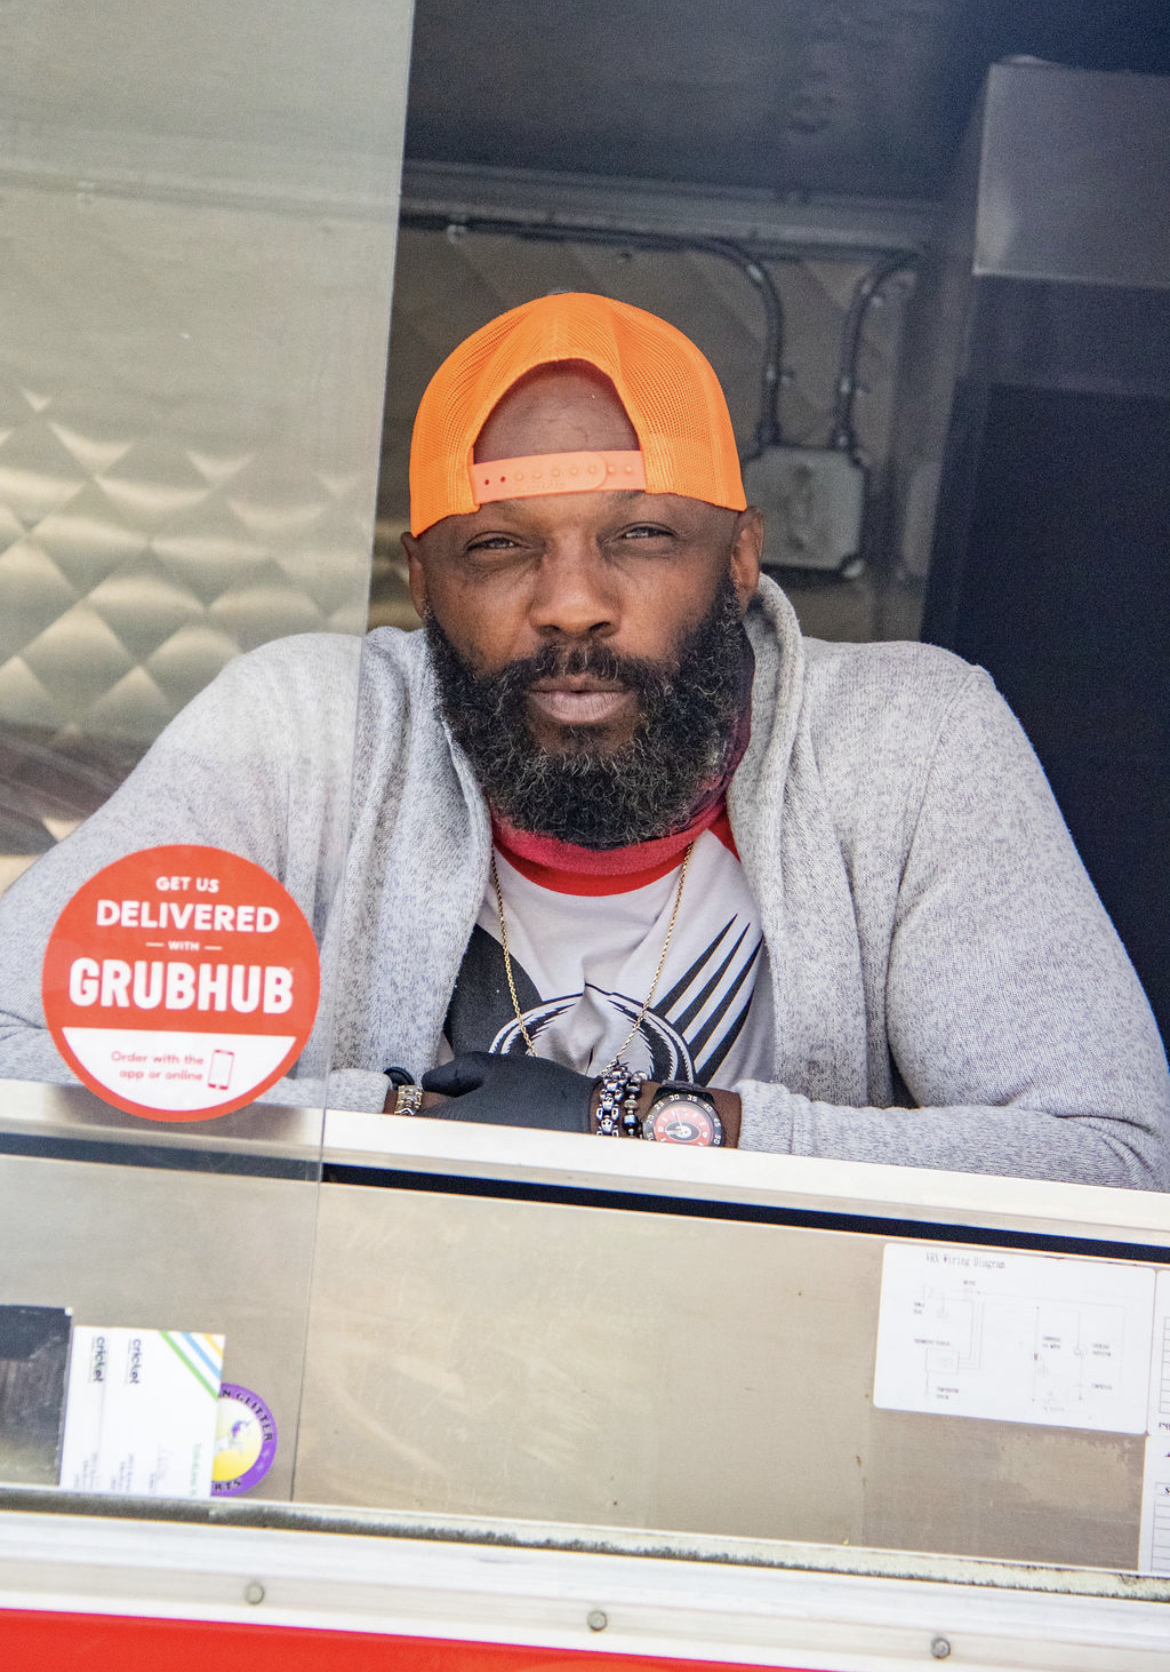 Photo Credit: Chelsea Whitney Art a man in a backwards orange cap looks on from the counter of his red food truck